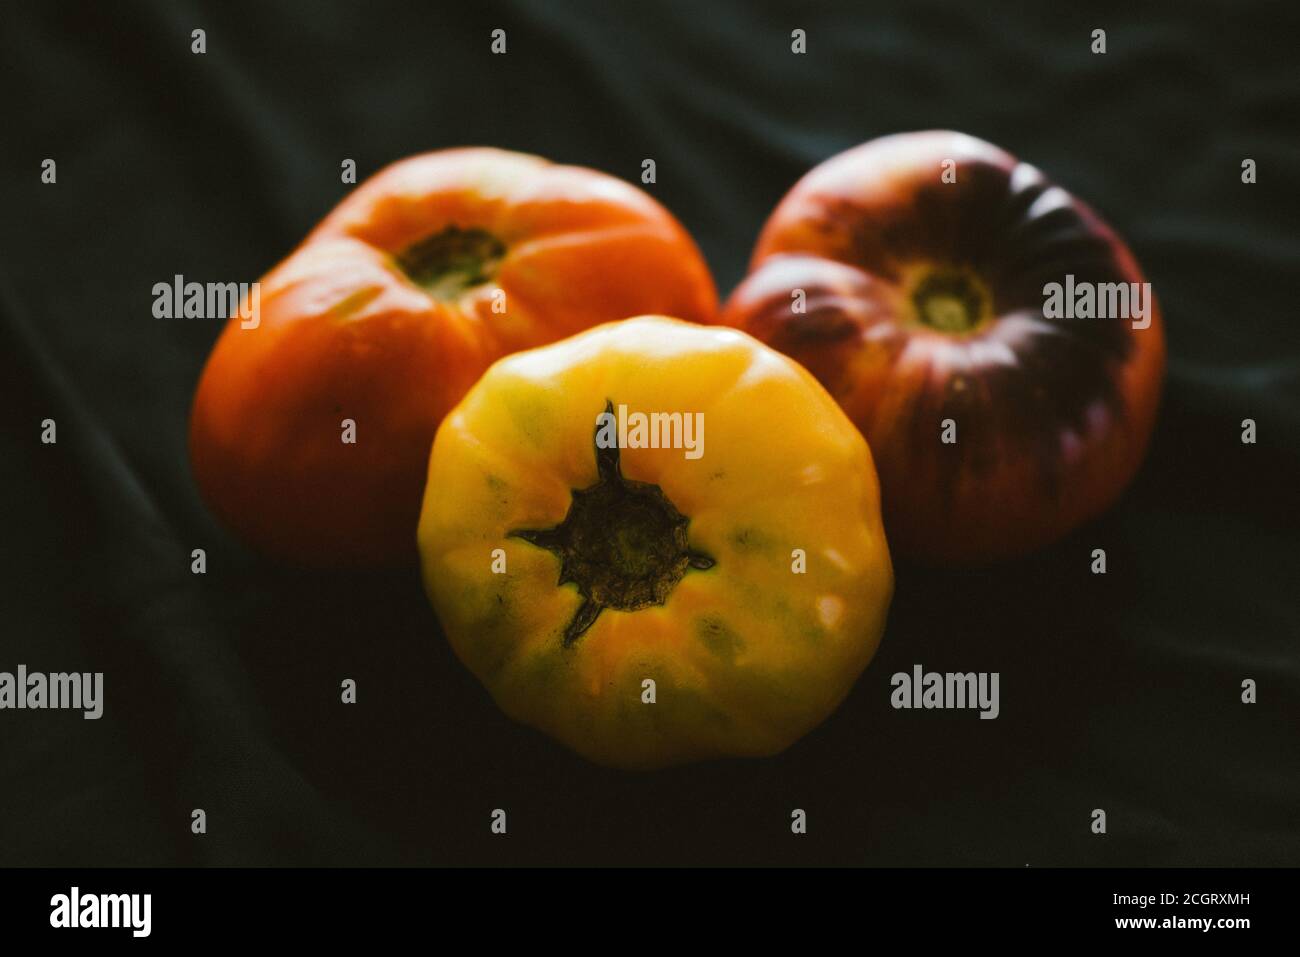 Colorful Heirloom Tomatoes Stock Photo